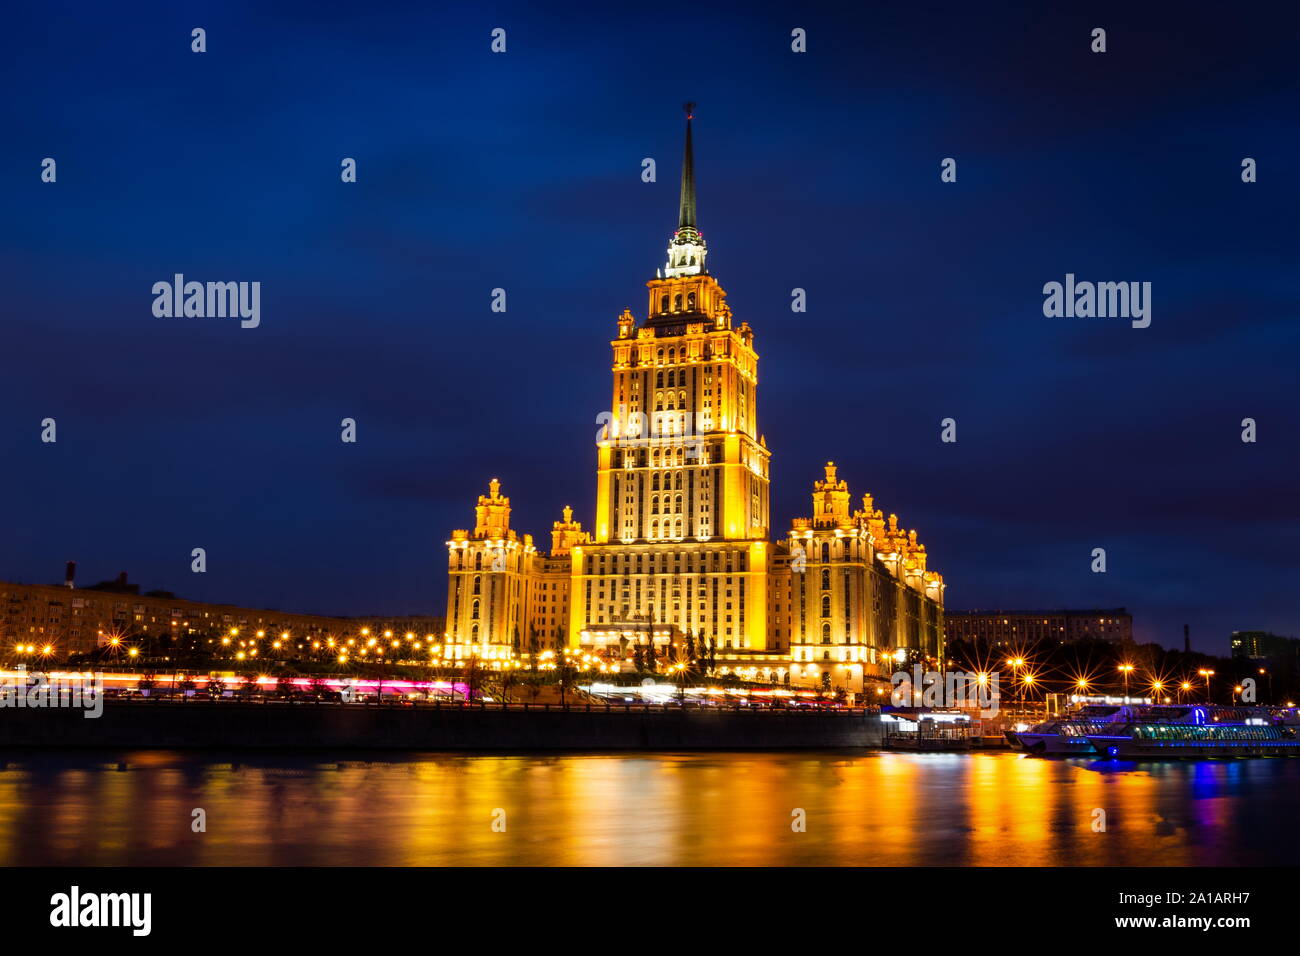 Hotel Ukraine. A high-rise in a city. Skyscrapers of Moscow. Stock Photo